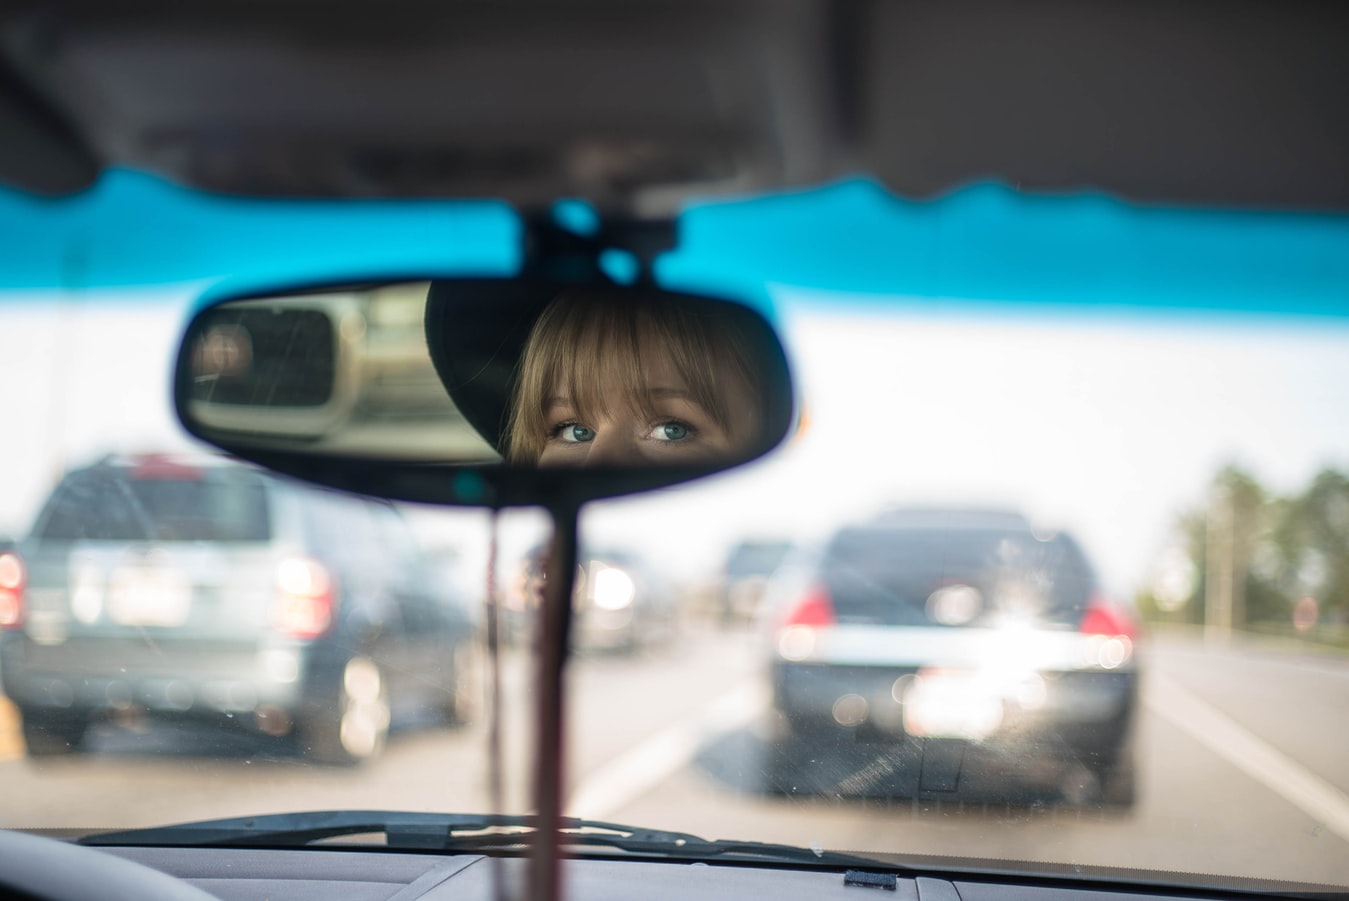 A young woman looking out of her rear view mirror